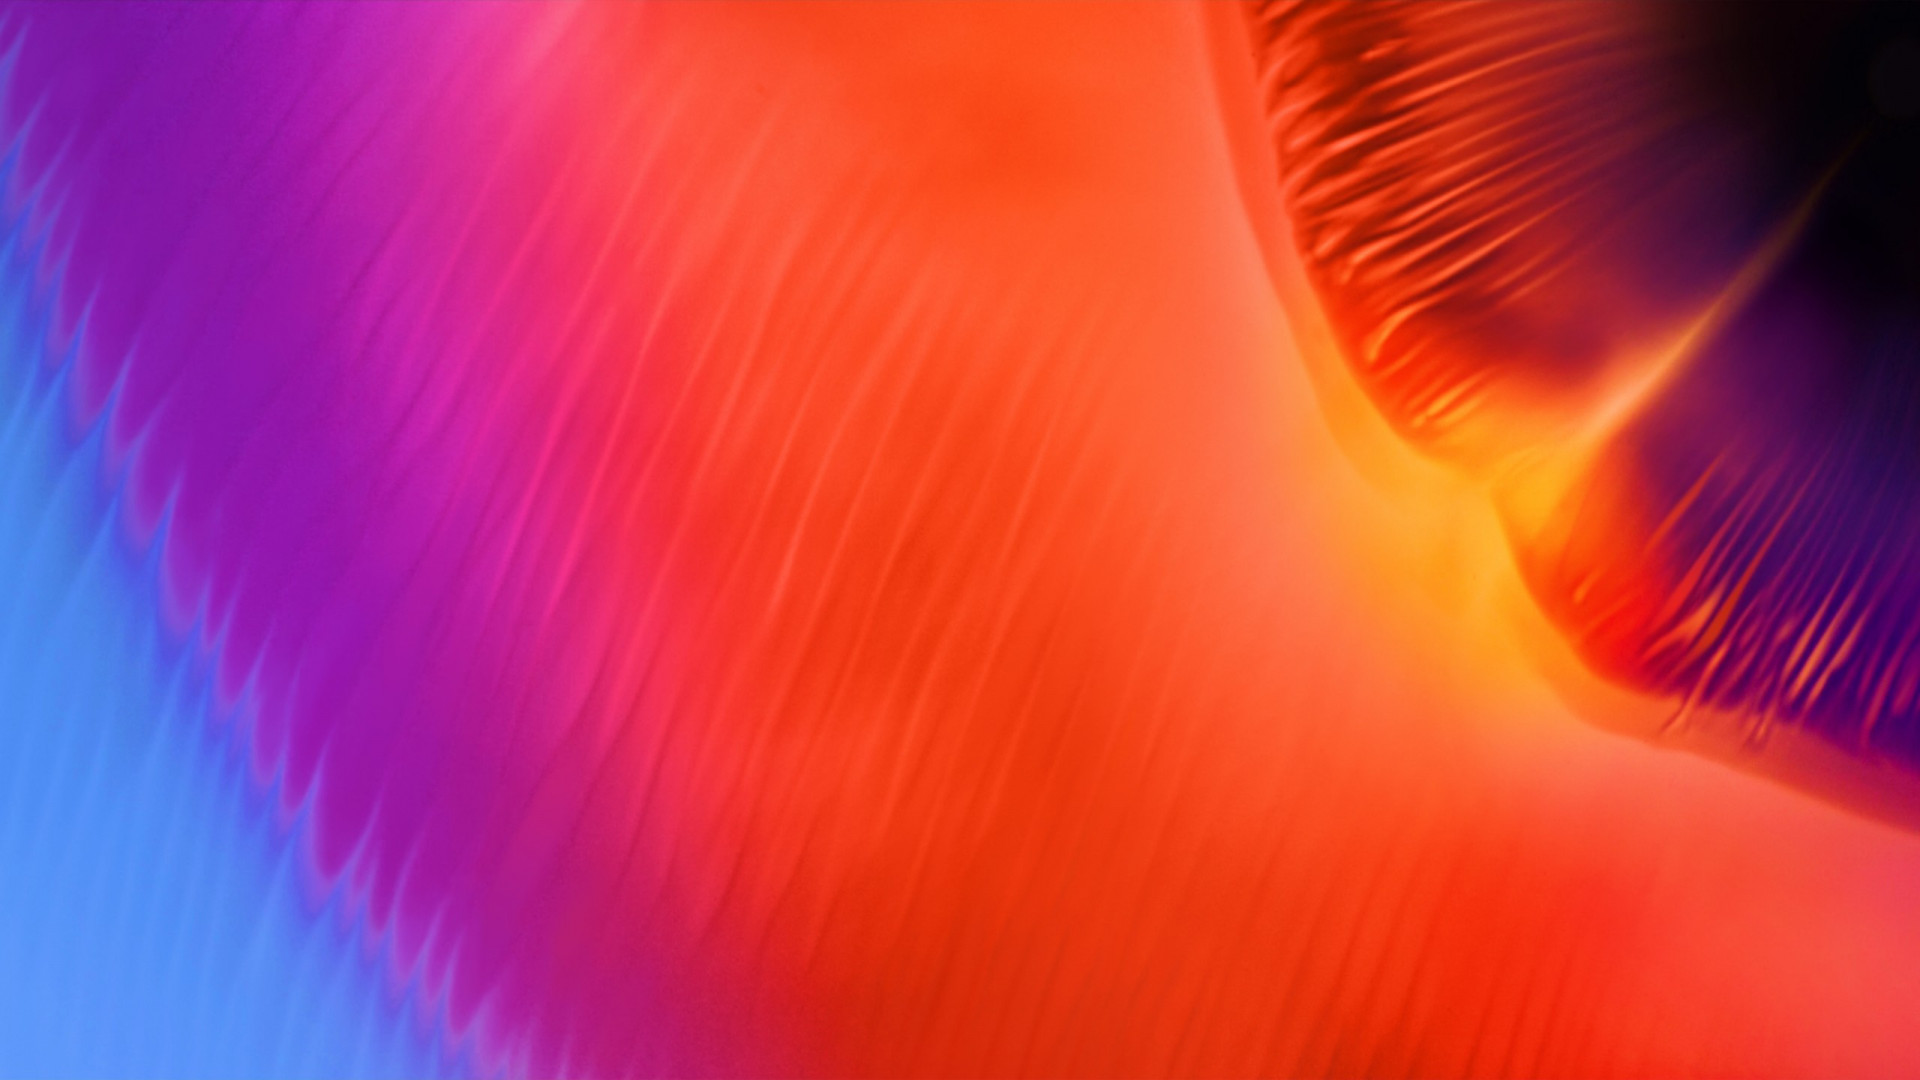 Warm colors in Samsung A8 wallpaper 1920x1080